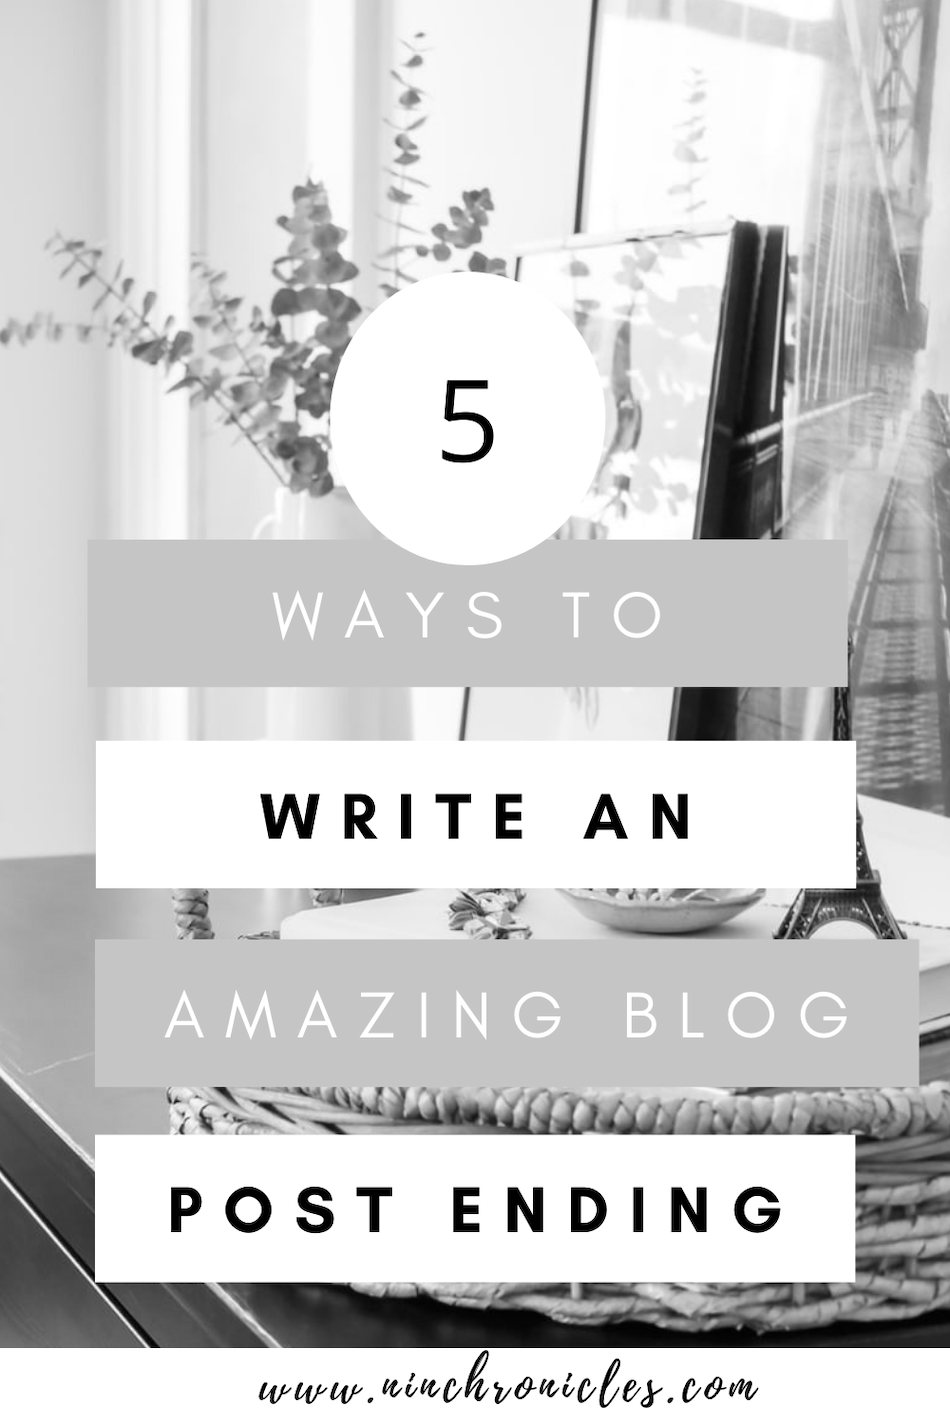 How to Write an Amazing Blog Post Ending